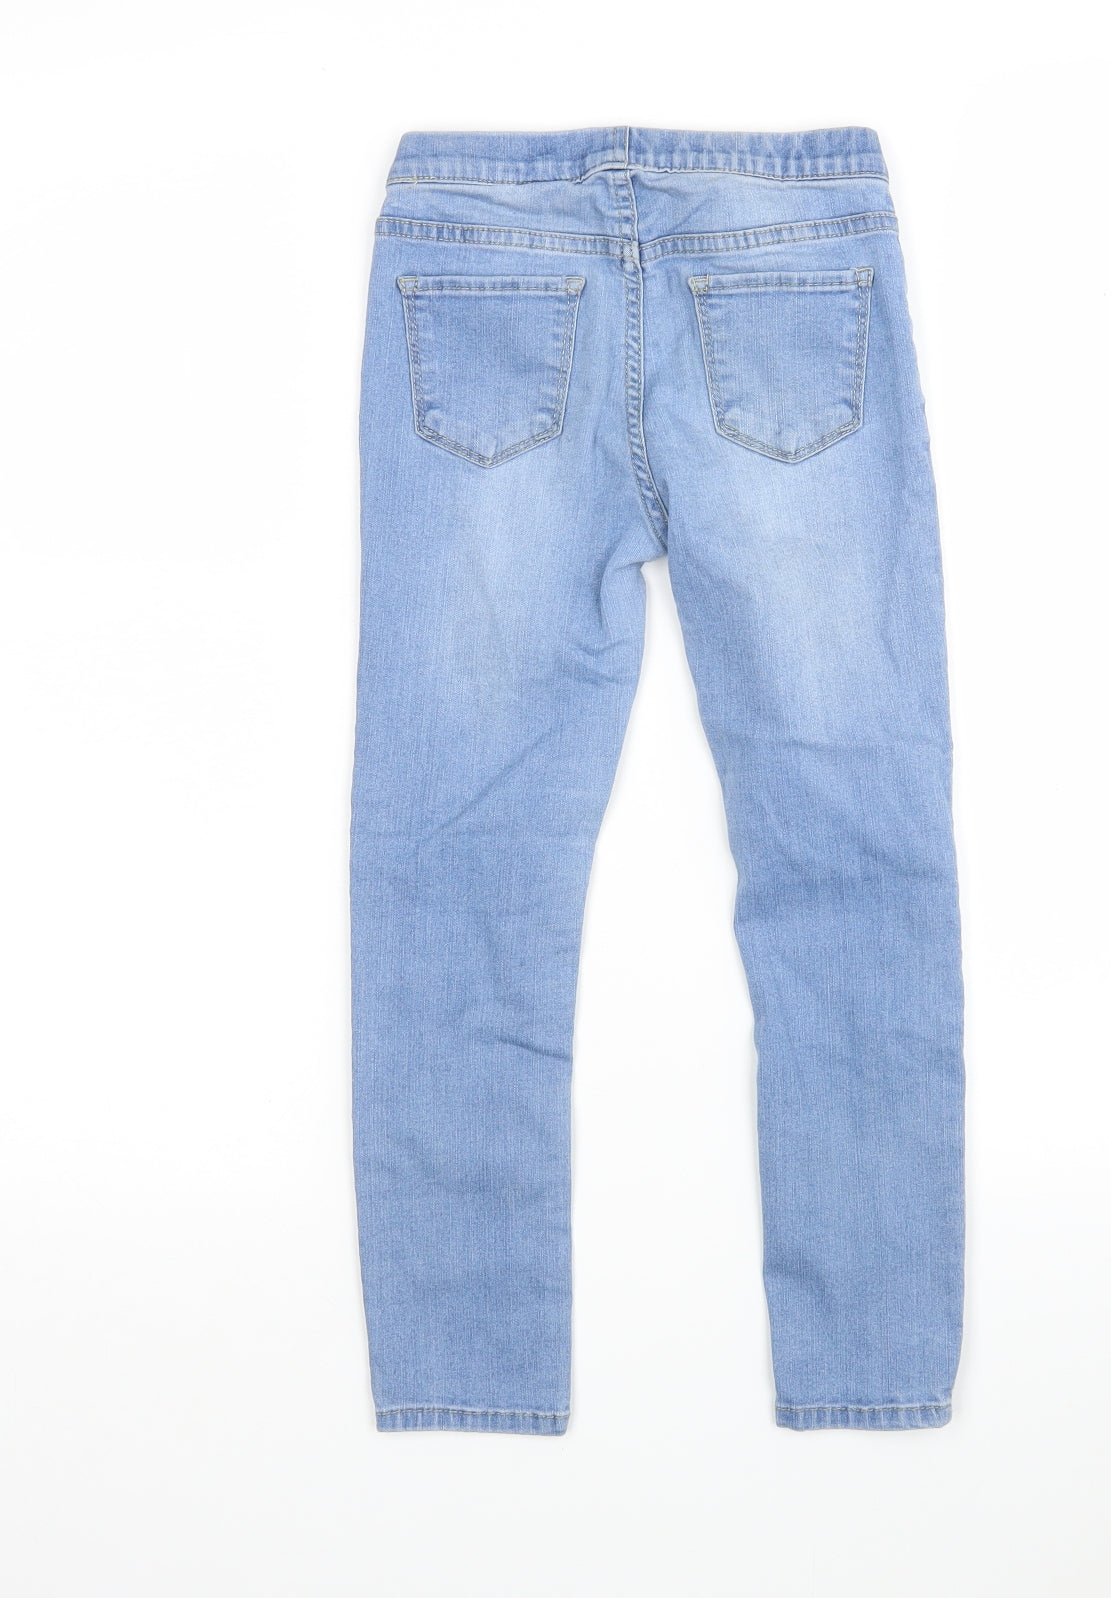 H&M Girls Blue  Cotton Jegging Jeans Size 7 Years  Regular